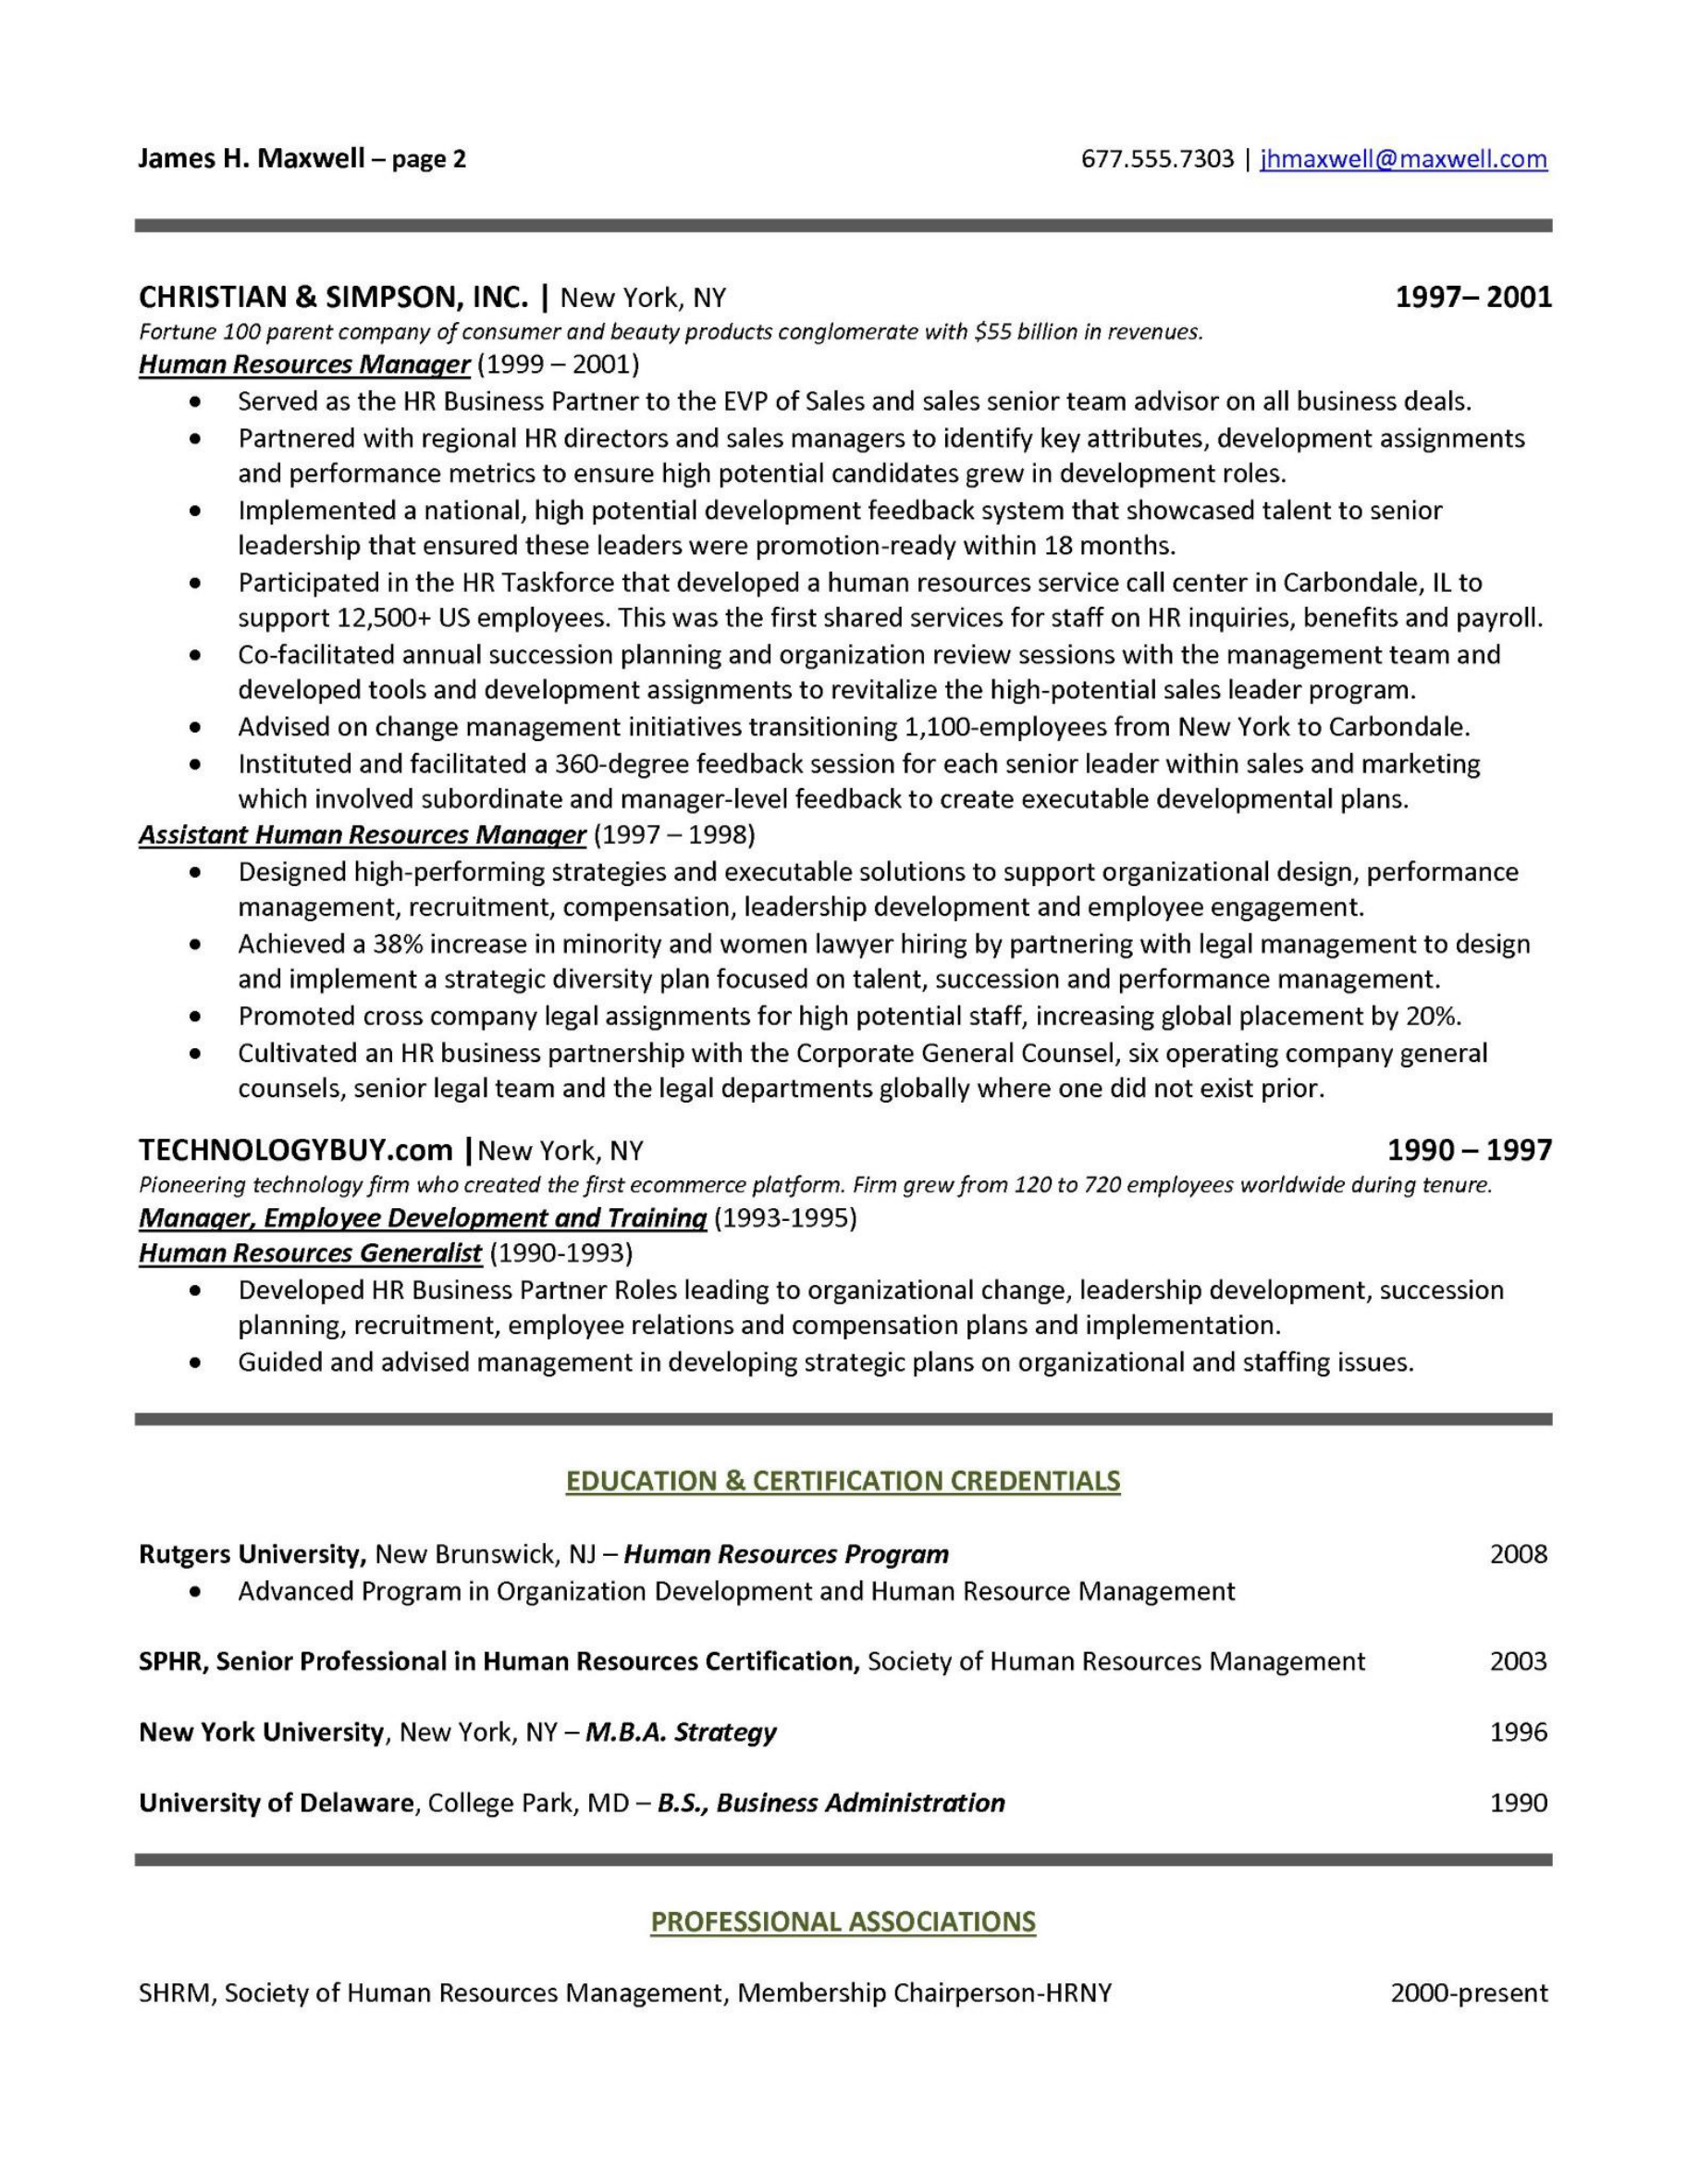 resume template for human resources